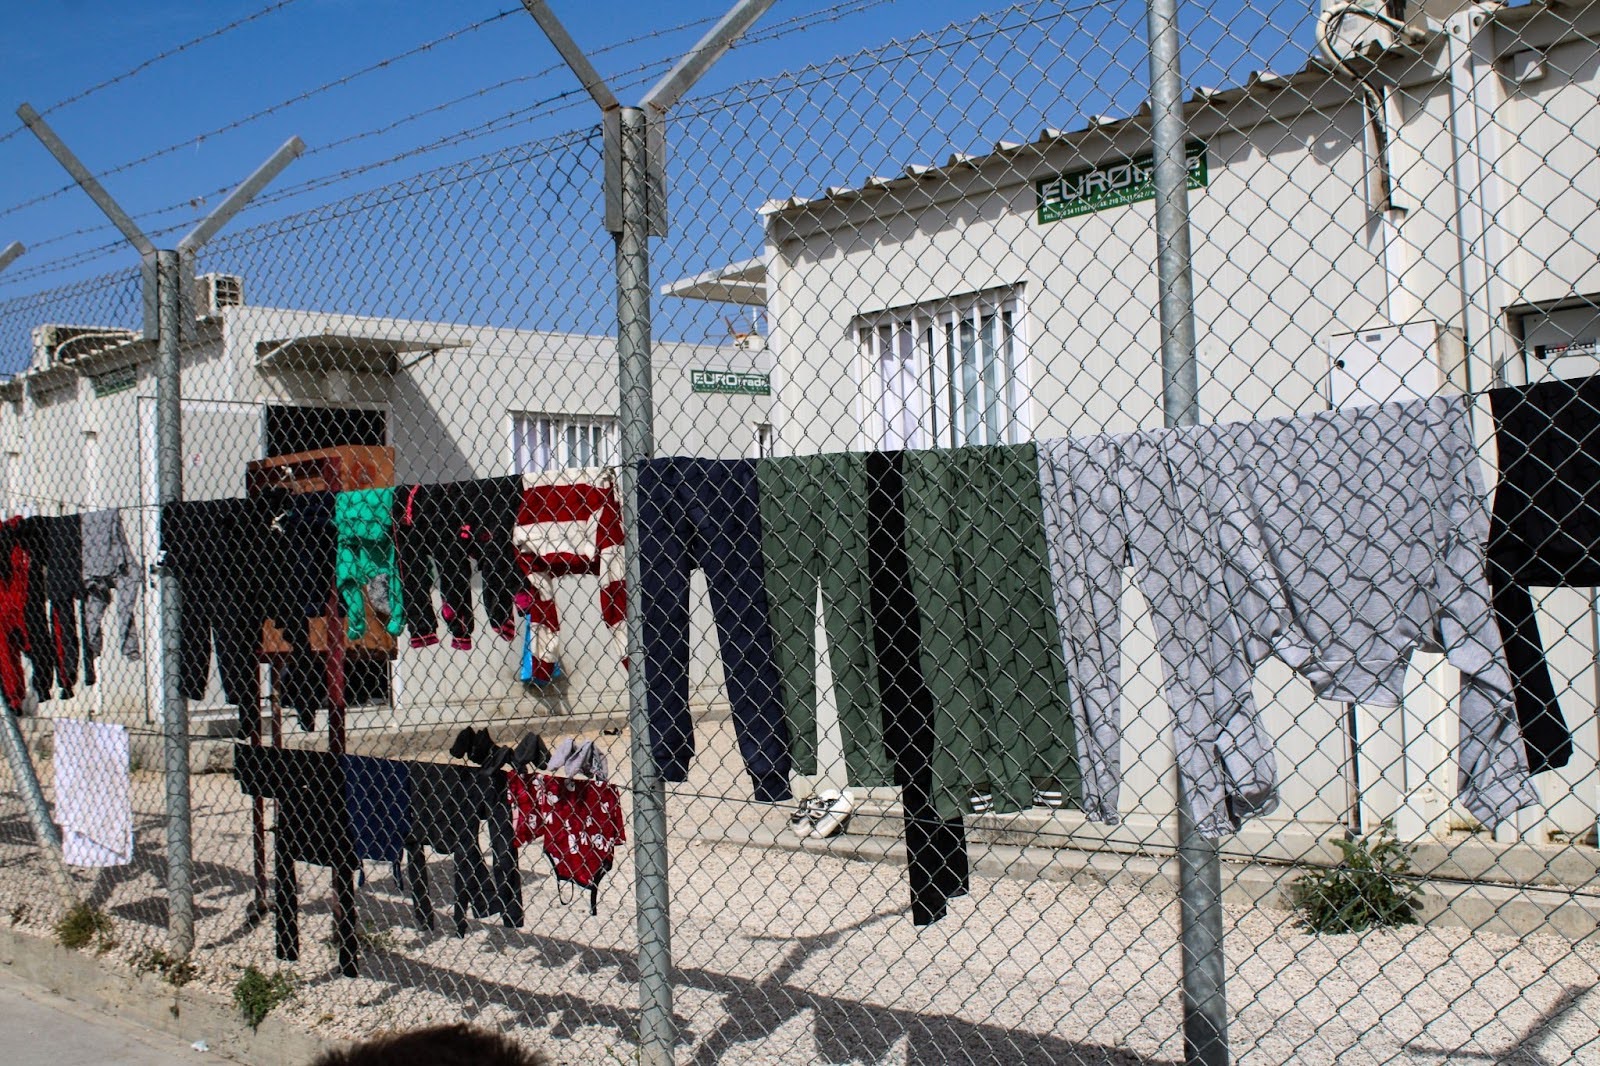 Pournara reception center on the outskirts of the Cypriot capital, Nicosia, where migrants are transferred once they arrive to the island (Hanna Davis)